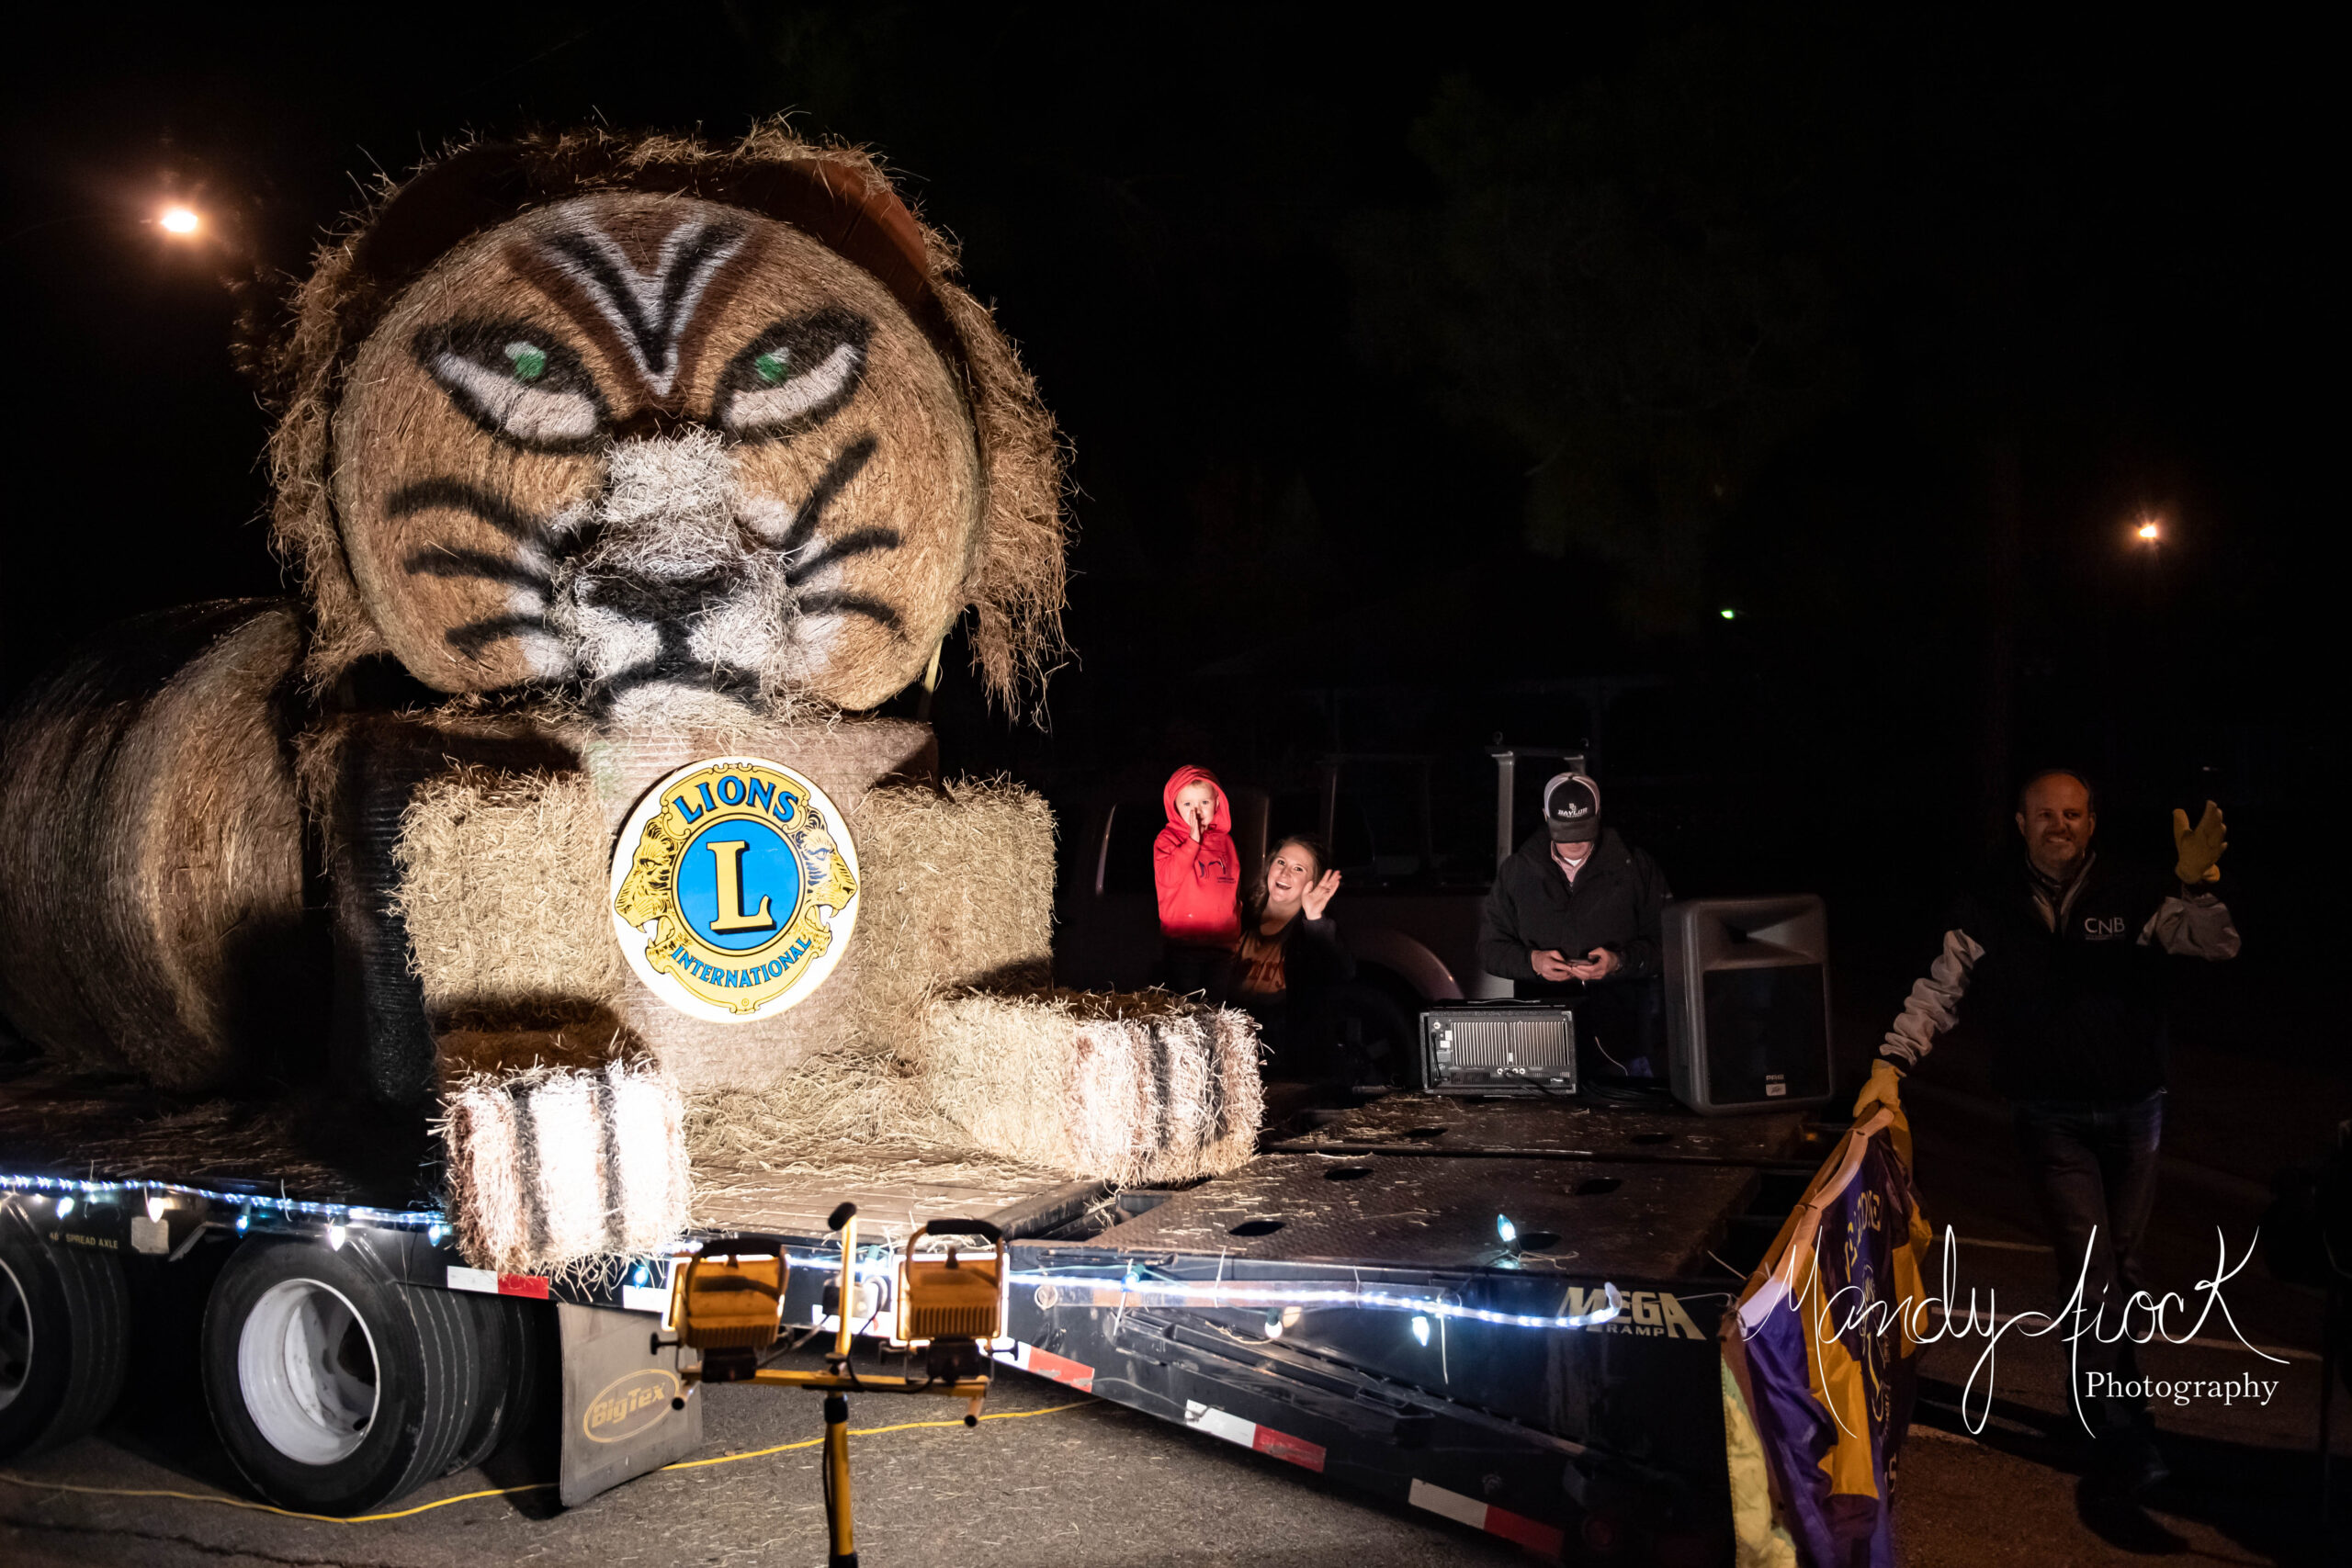 Photos from the 13th Annual Sulphur Springs Lions Club Lighted Christmas Parade by Mandy Fiock Photography